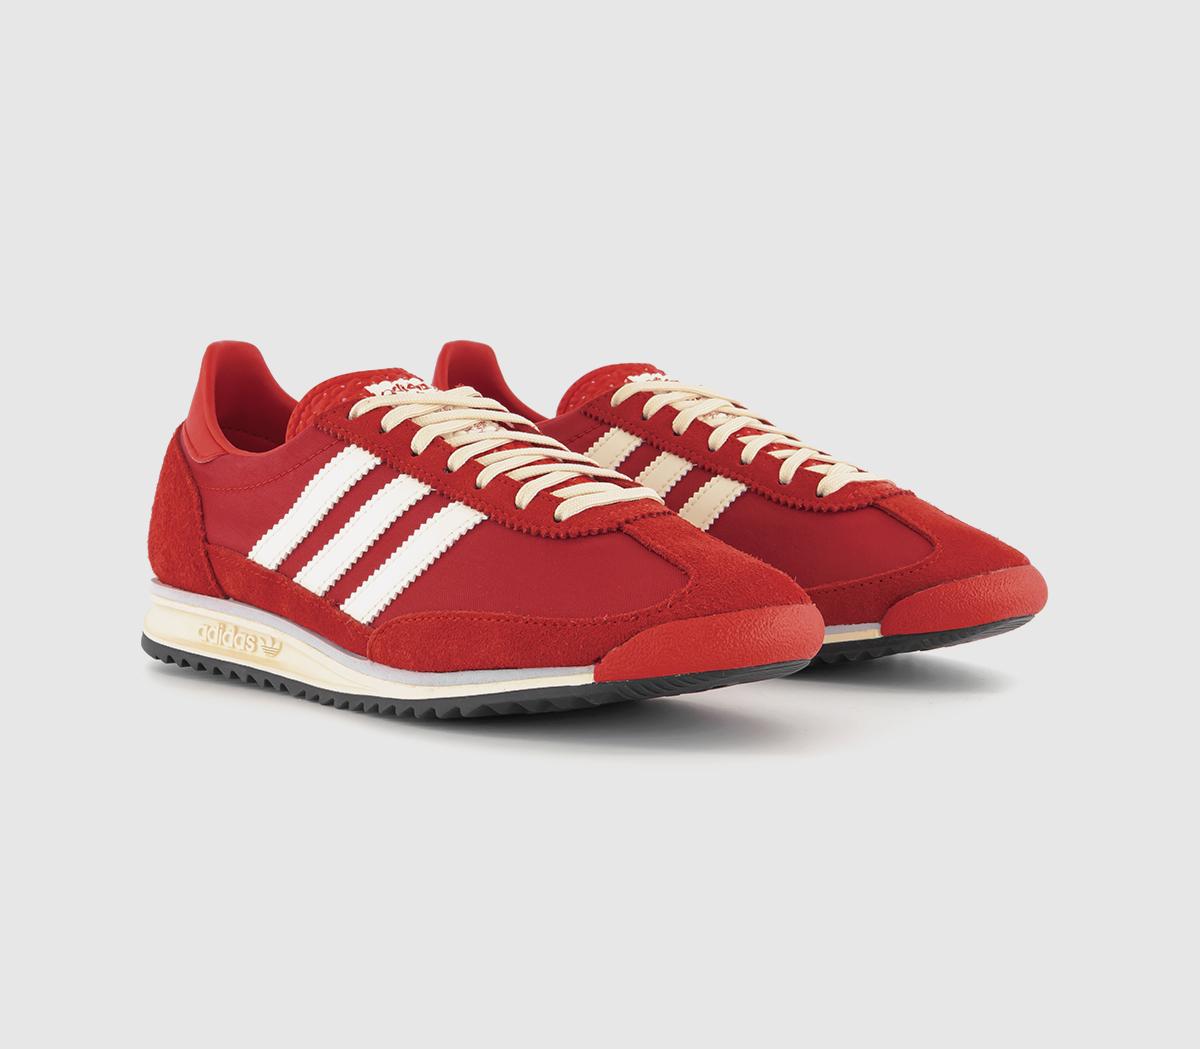 Adidas SL 72 Trainers Scarlet Red White Black, 7.5